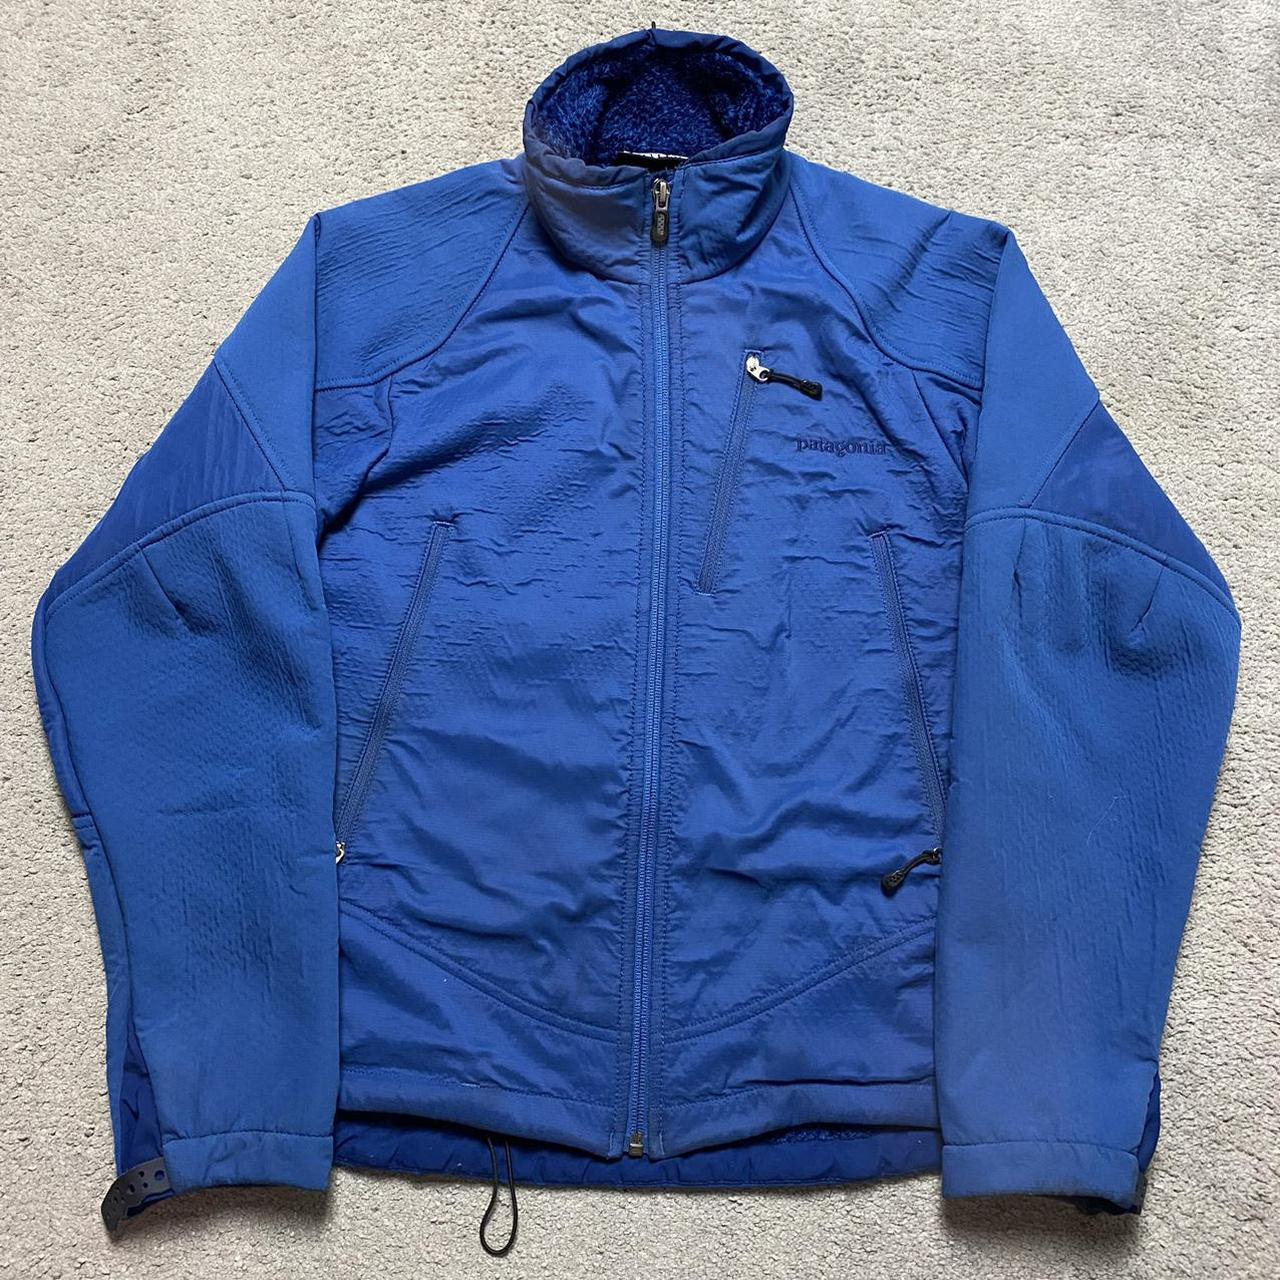 Women’s Patagonia blue embroidered fleece lined... - Depop